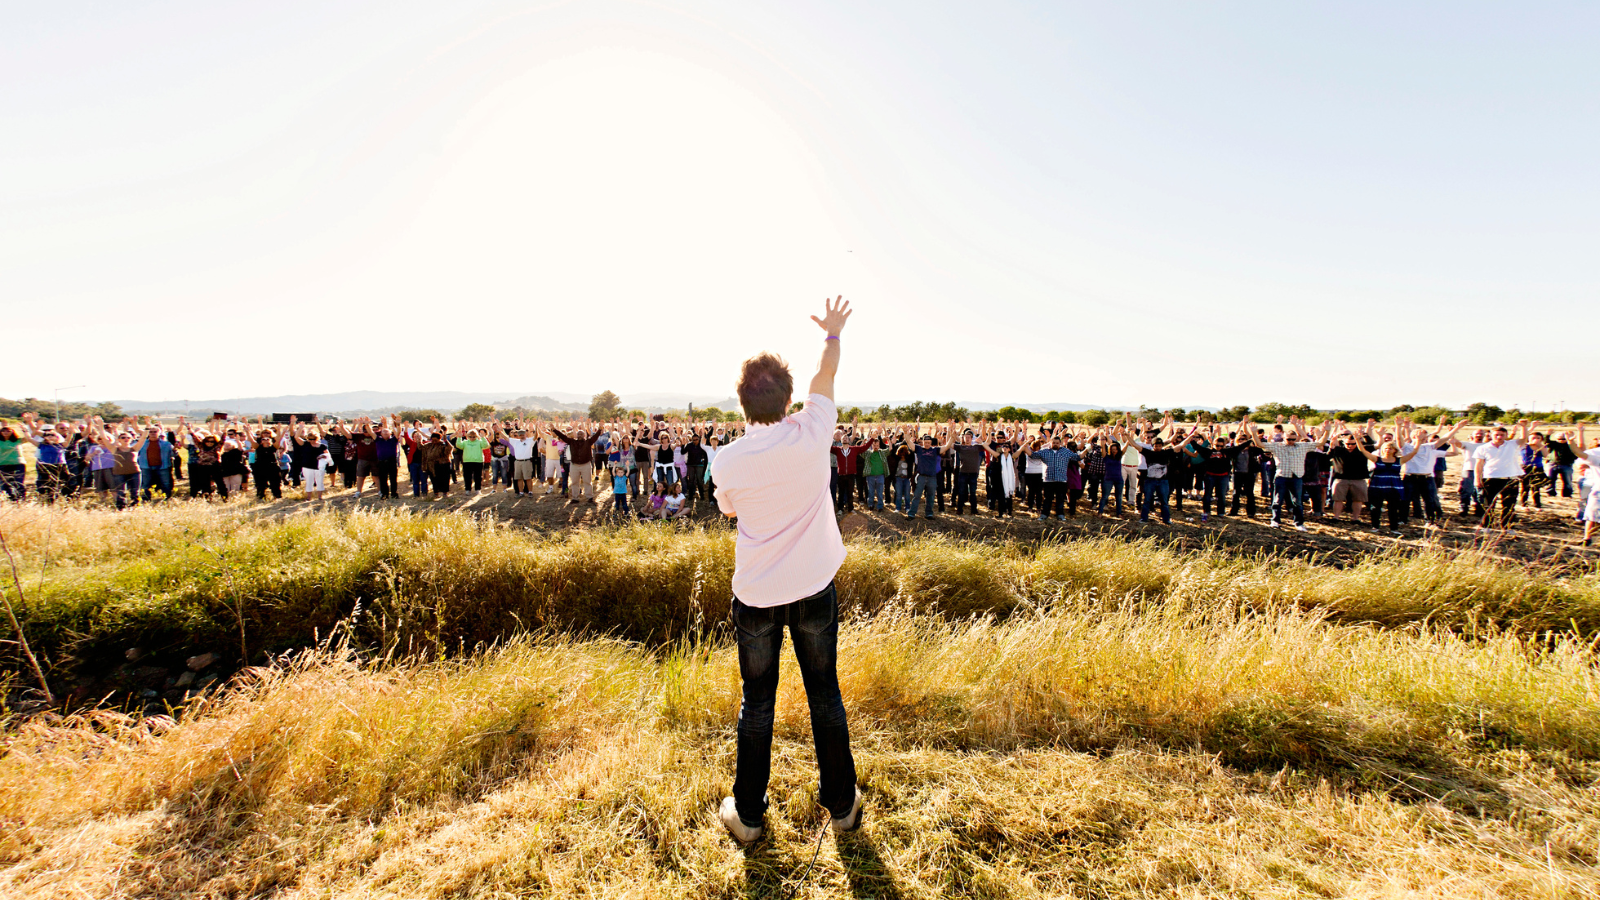 A man speaking to a crowd of people in a field